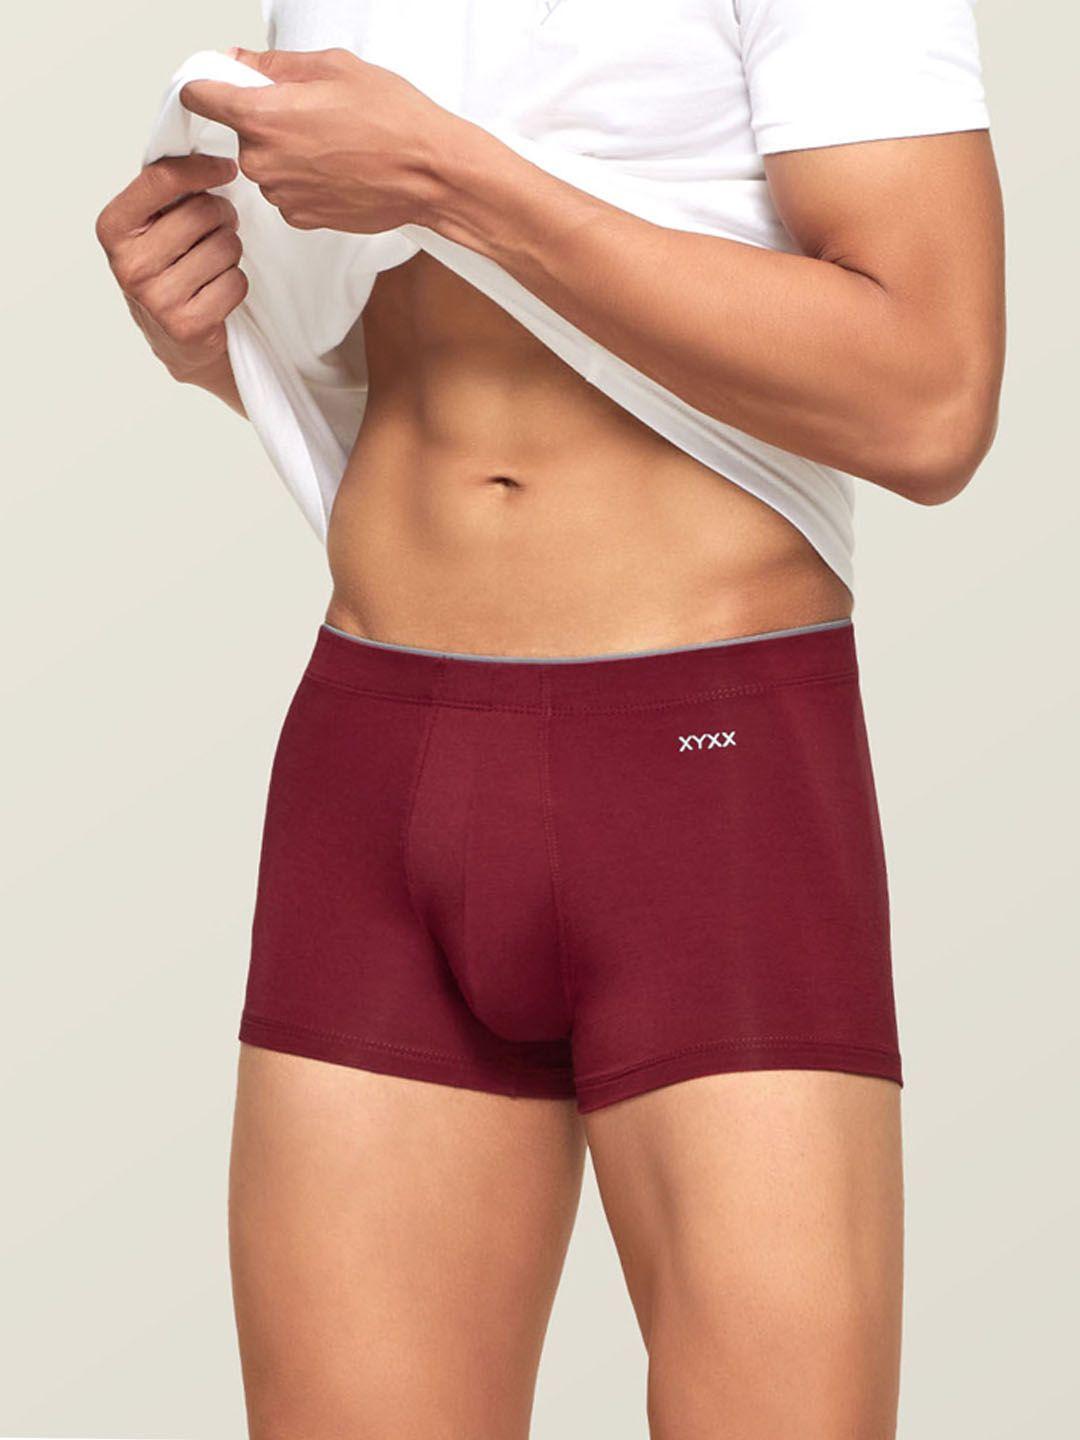 xyxx-men-maroon-solid-antimicrobial-trunk